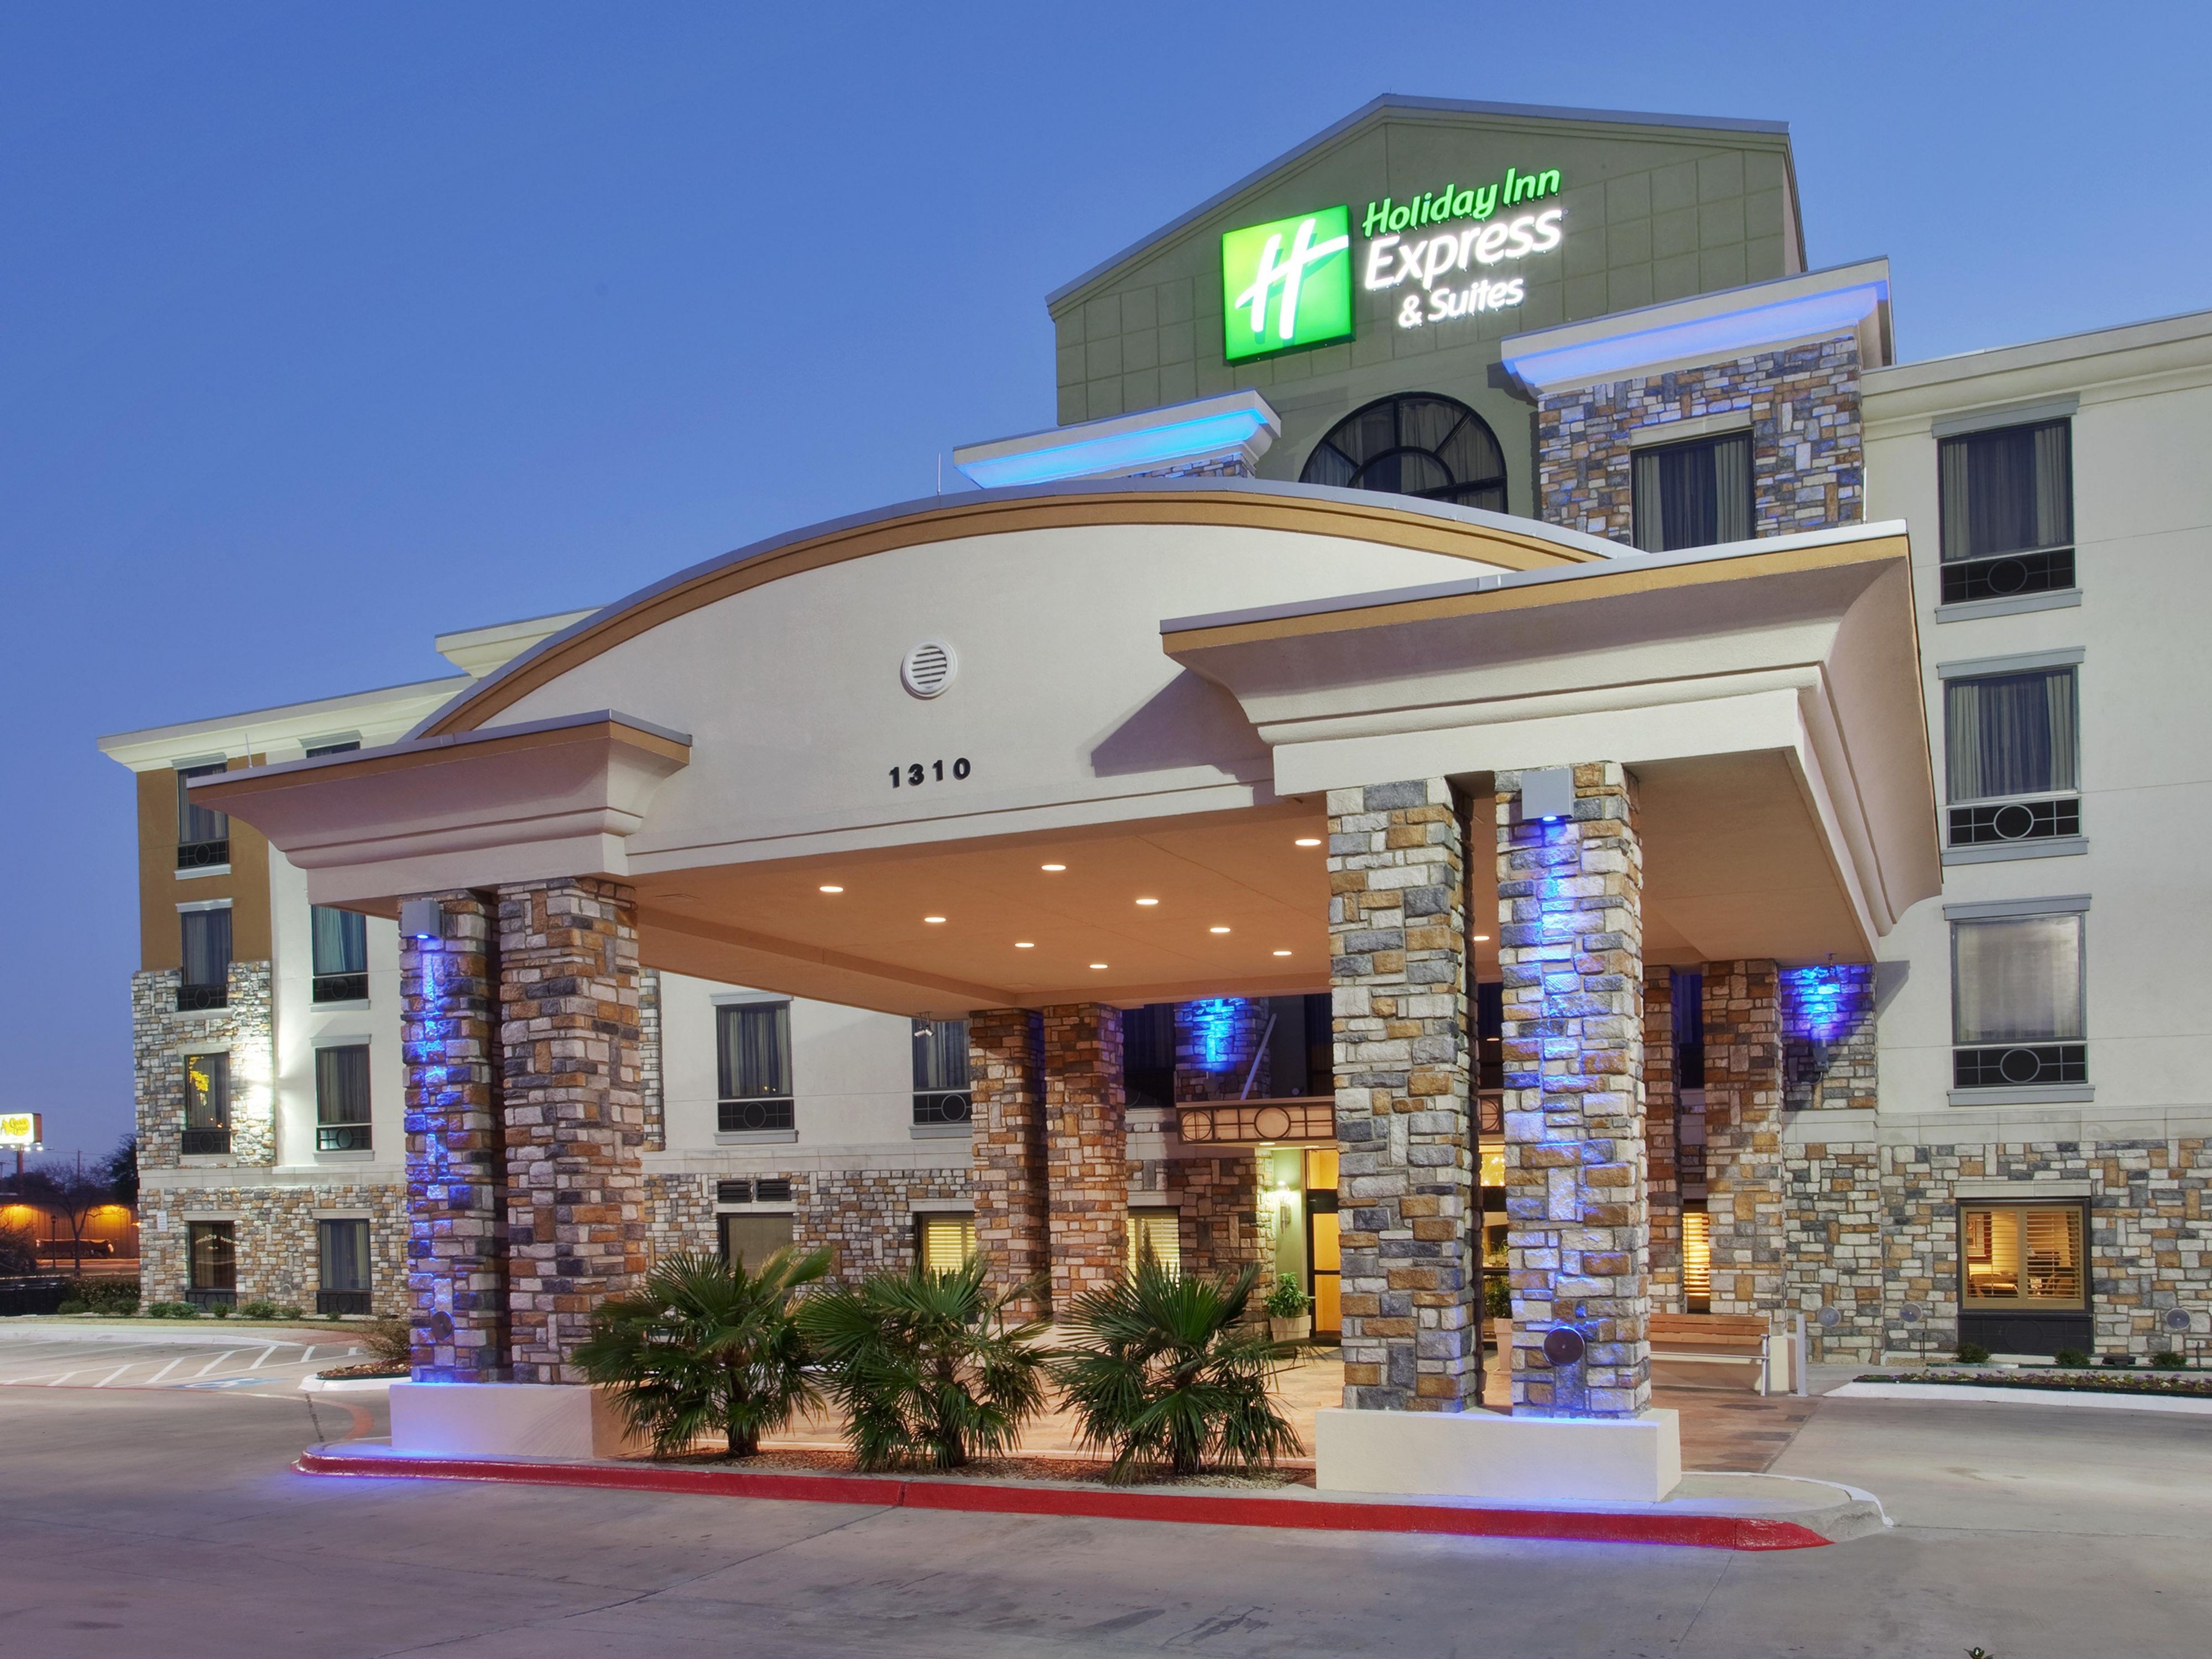  Holiday  Inn  Express  Suites  Dallas South Desoto Hotel  